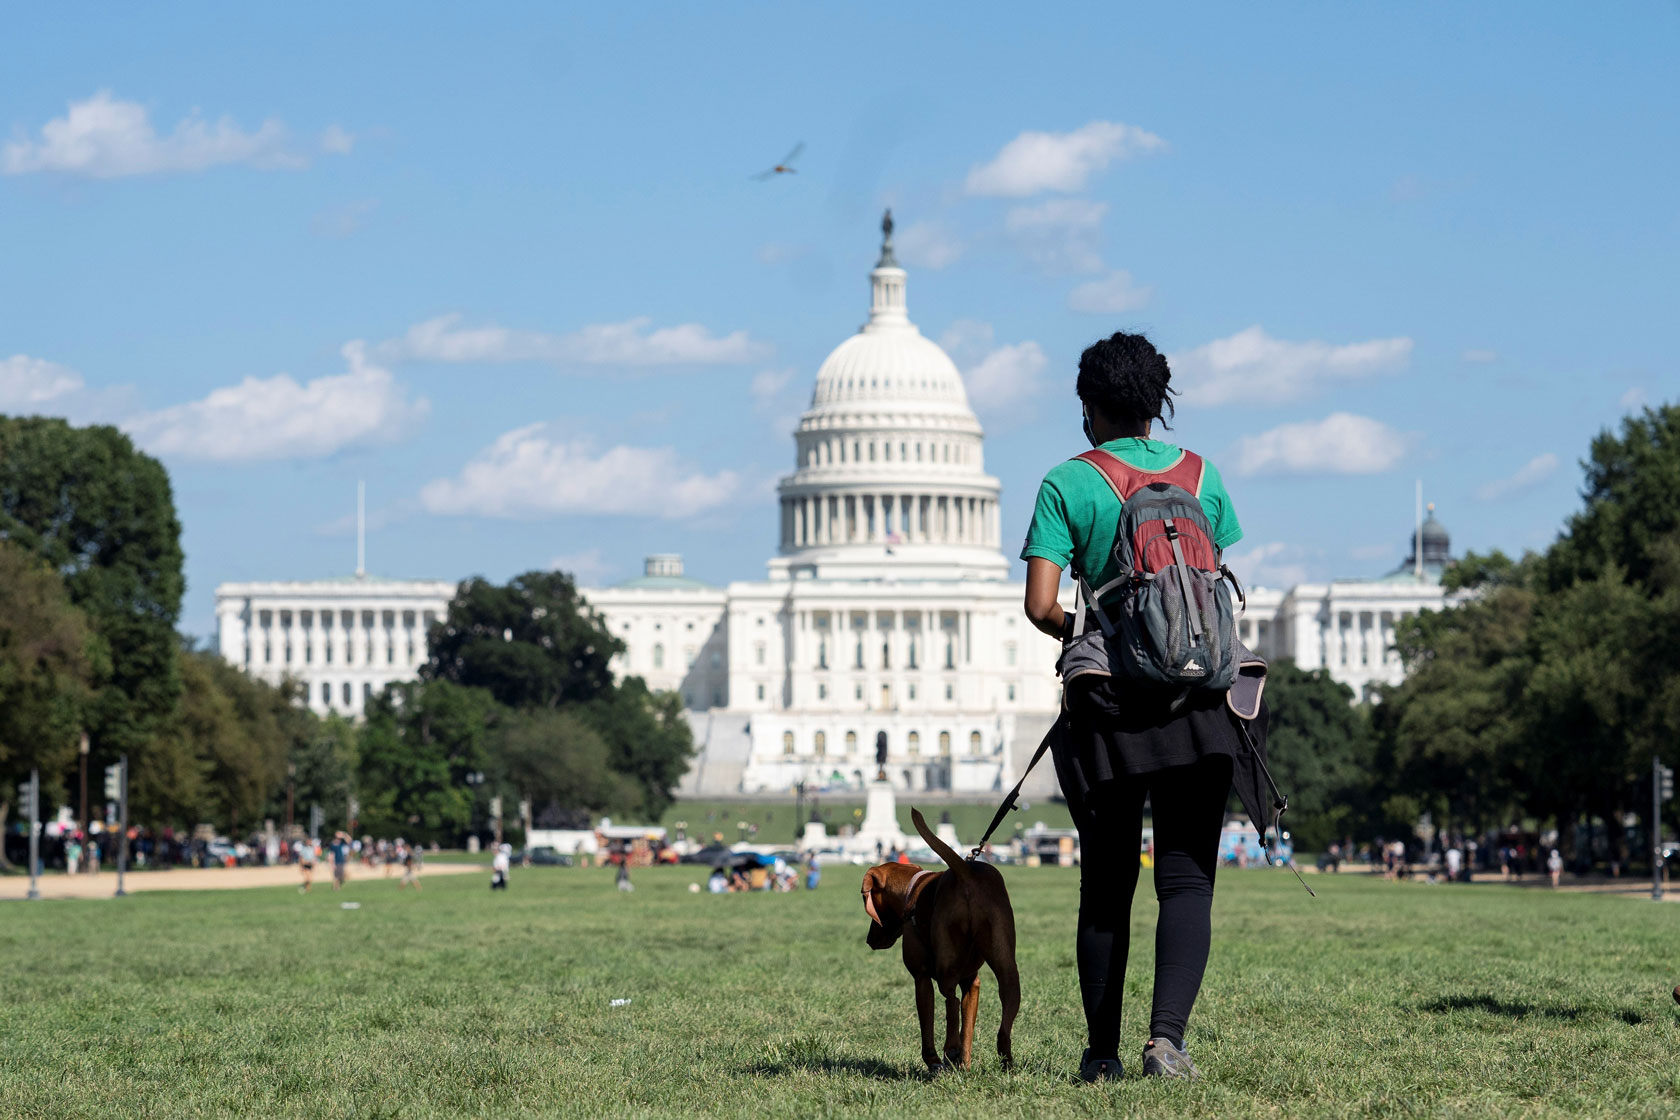 Photo shows the back of a woman walking her dog on the lawn in front of the U.S. Capitol building on a sunny day.